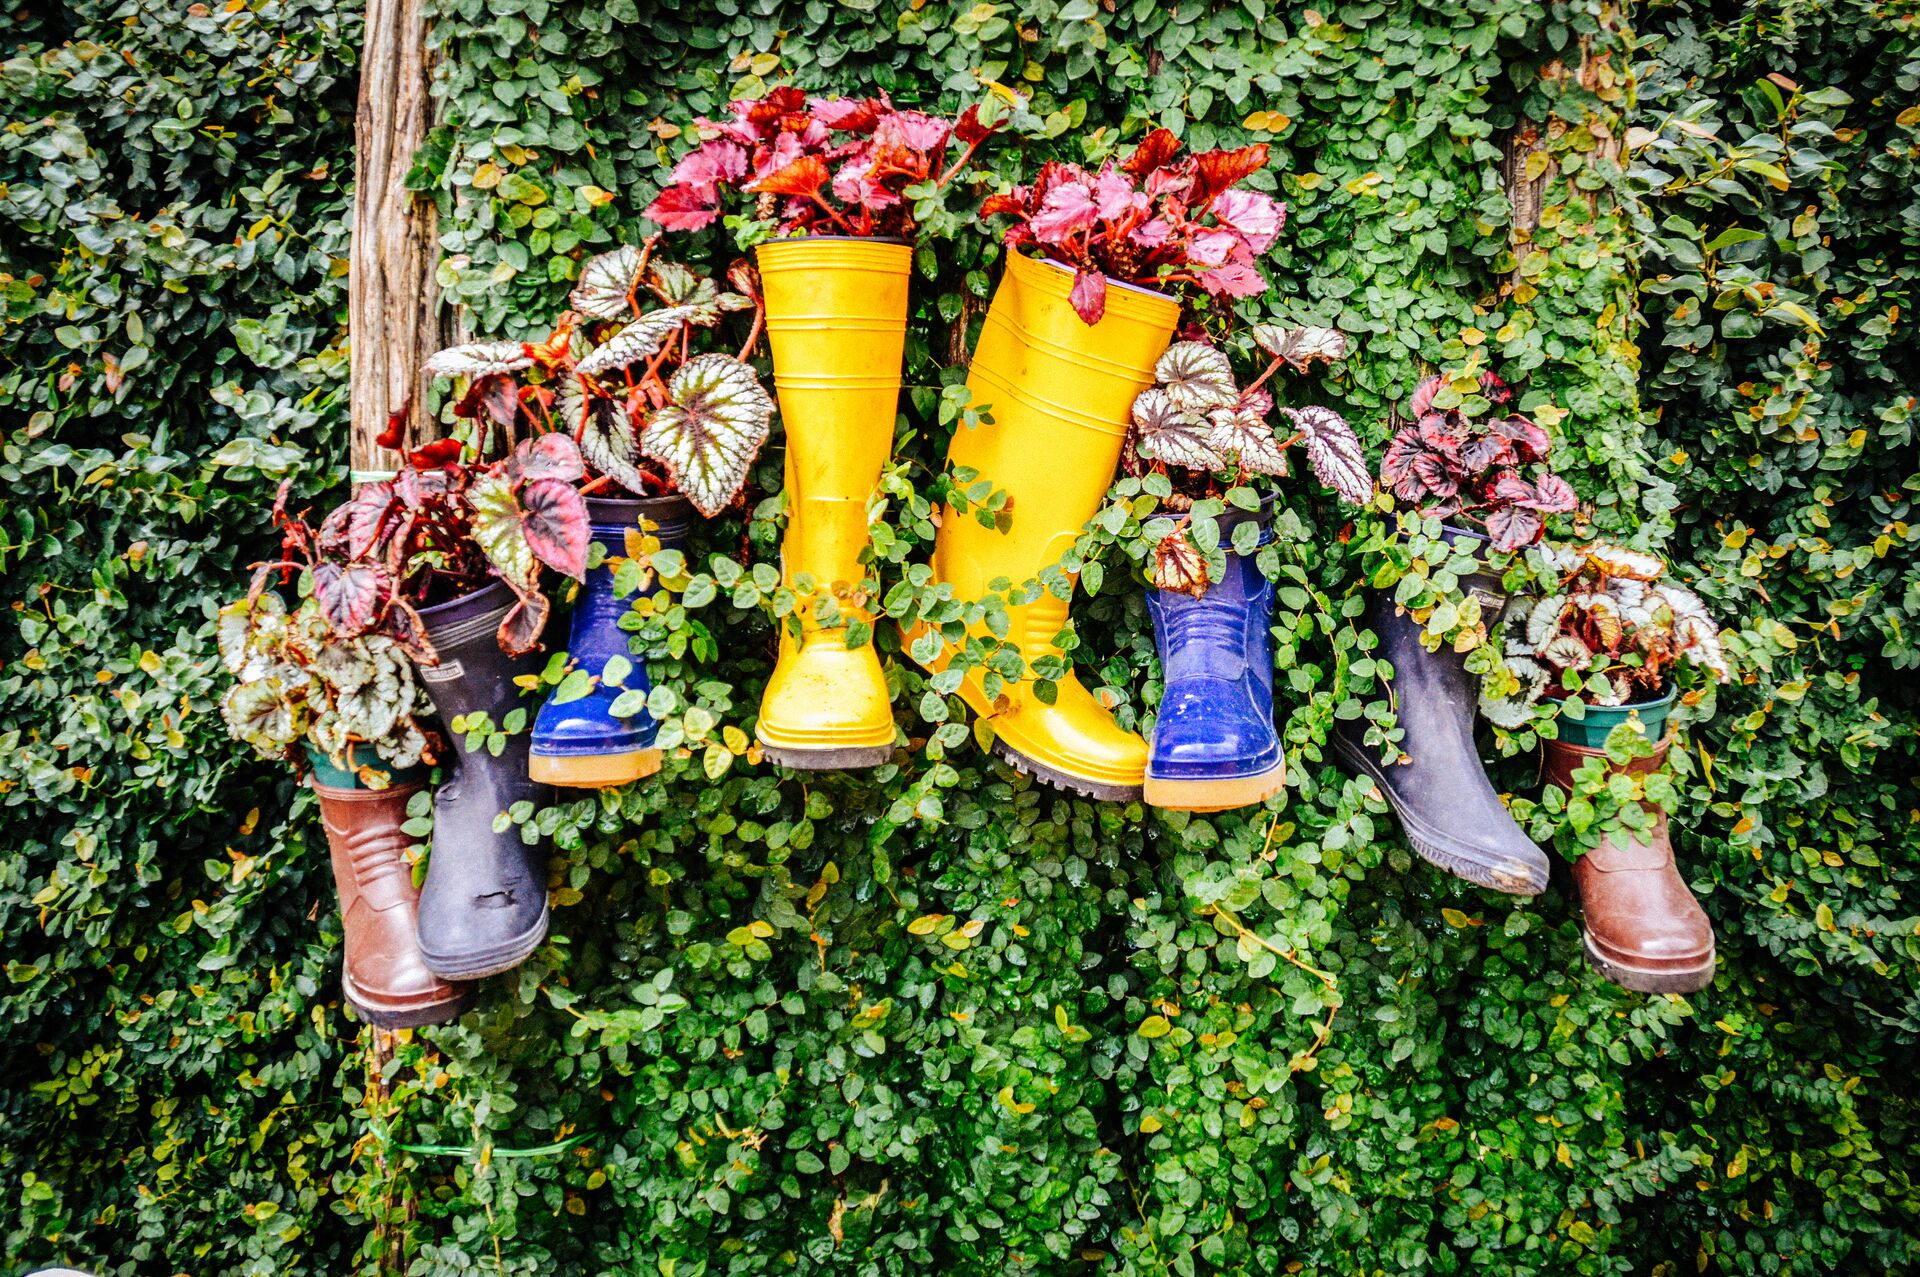 Plant filled boots hang from an outside foliage covered wall